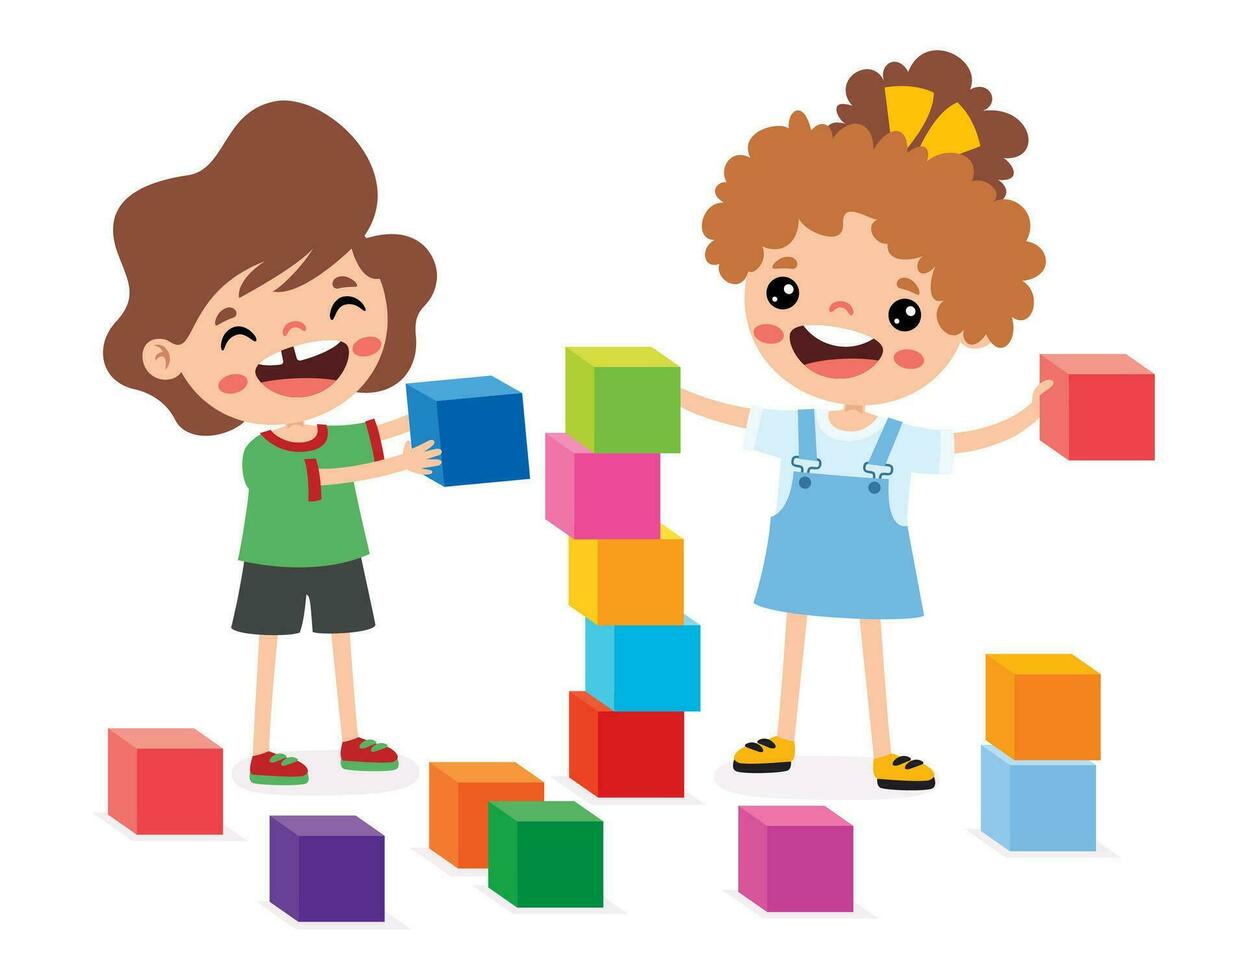 Kids Playing With Building Blocks vector